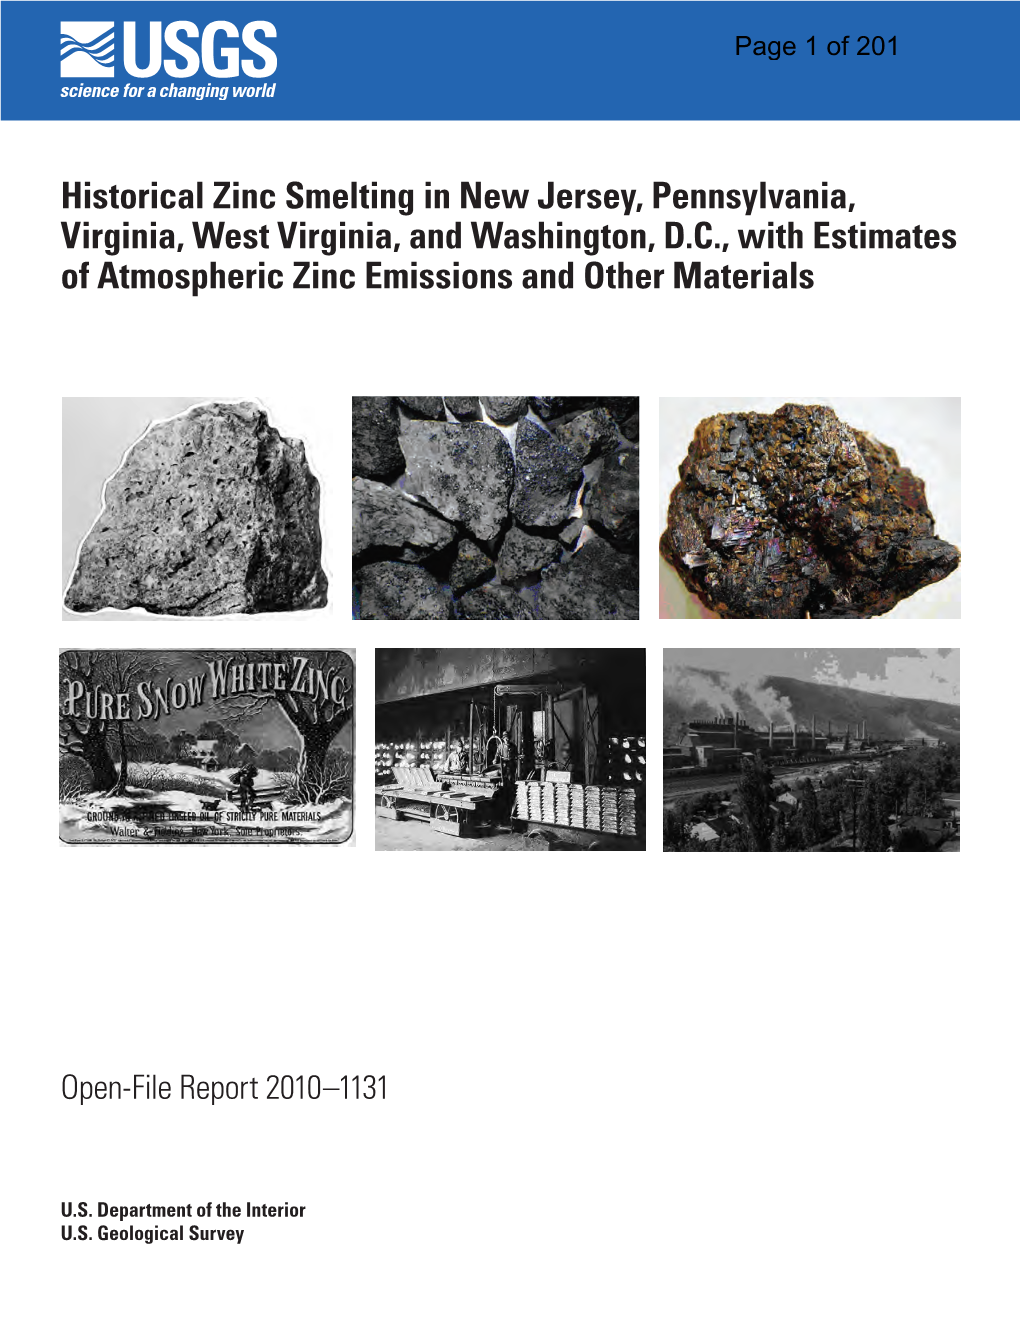 Historical Zinc Smelting in New Jersey, Pennsylvania, Virginia, West Virginia, and Washington, D.C., with Estimates of Atmospheric Zinc Emissions and Other Materials